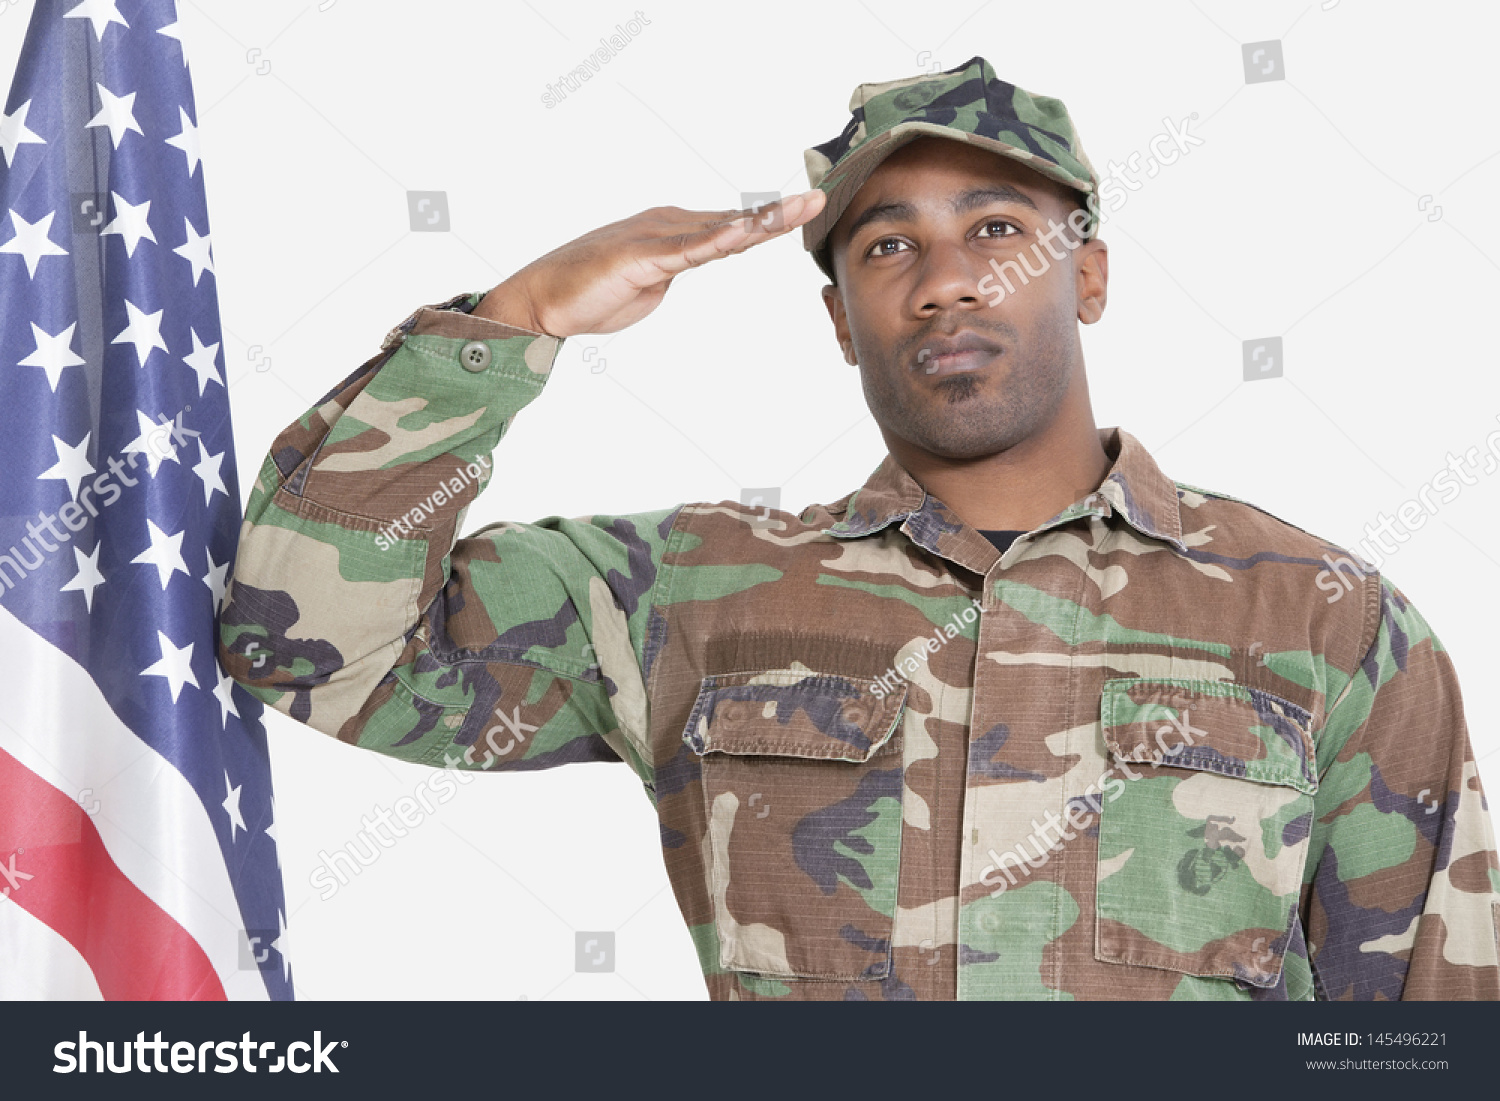 stock-photo-portrait-of-us-marine-corps-soldier-saluting-american-flag-over-gray-background-145496221.jpg